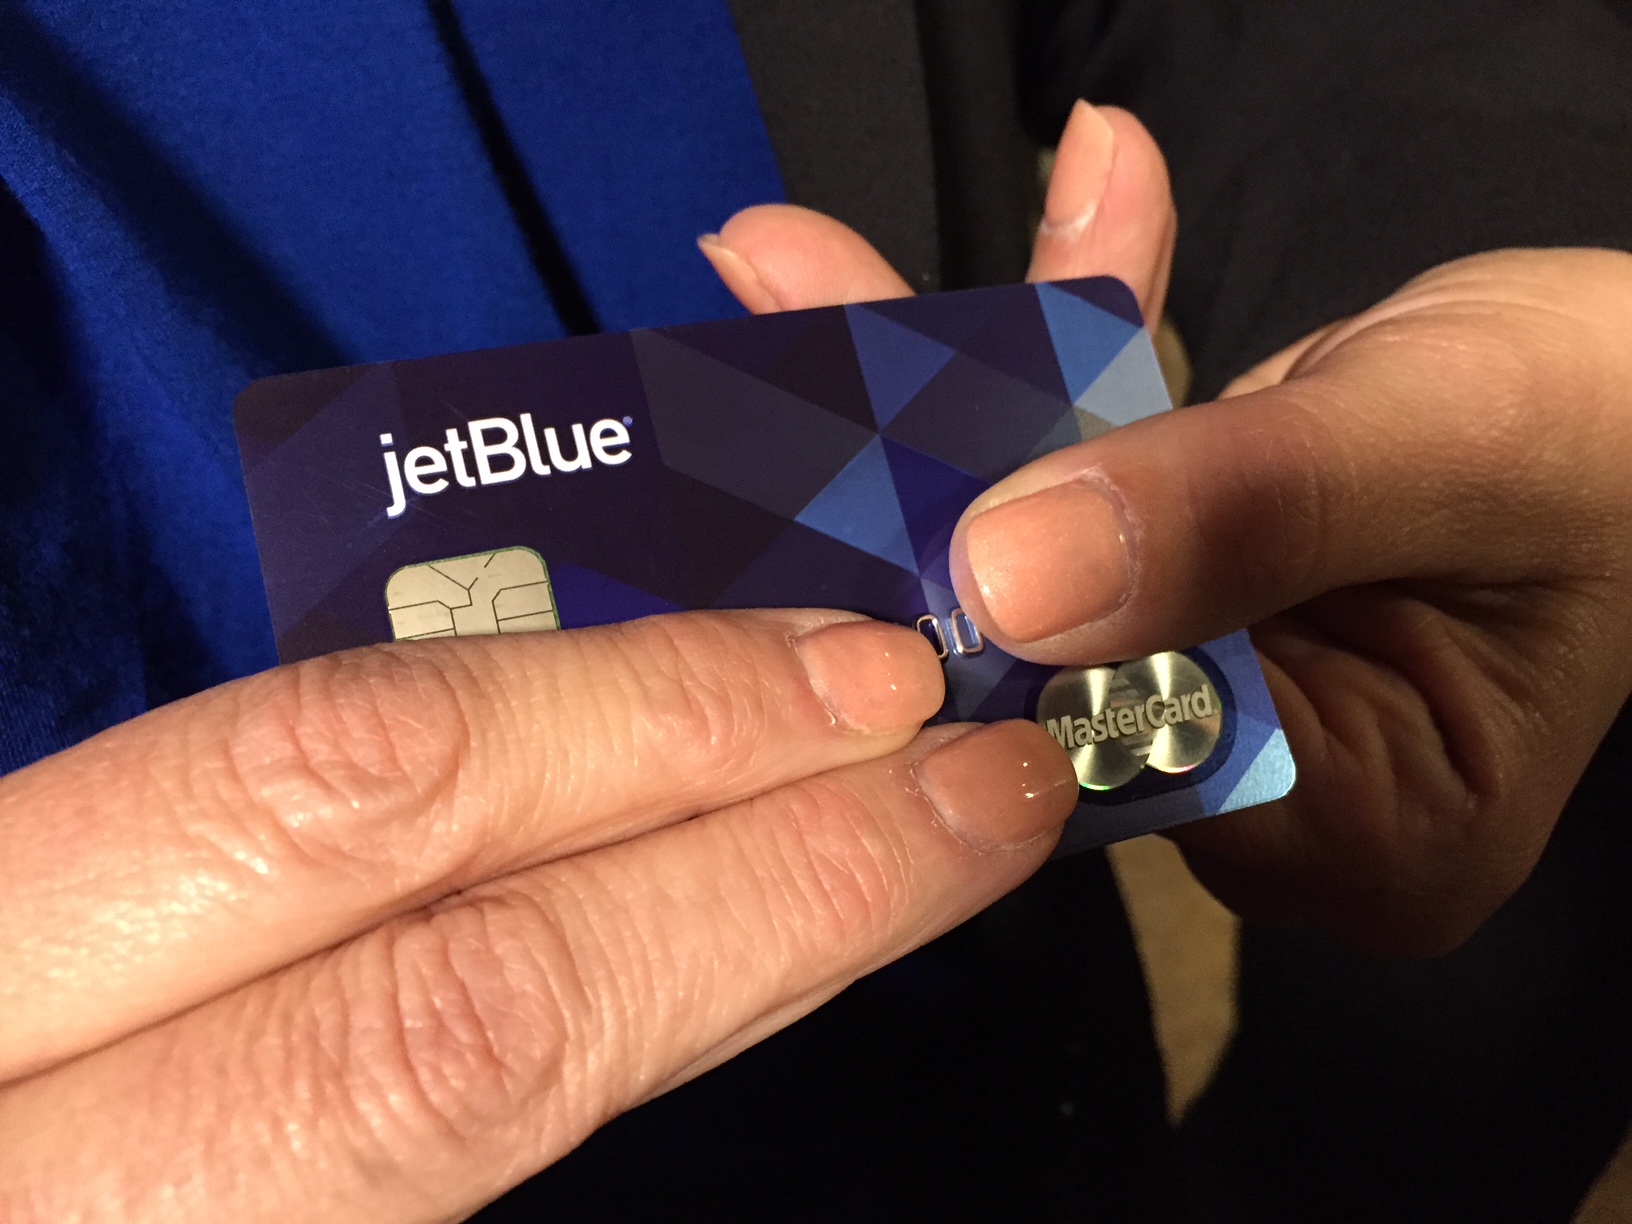 JetBlue Plus Credit Card from Barclaycard and MasterCard